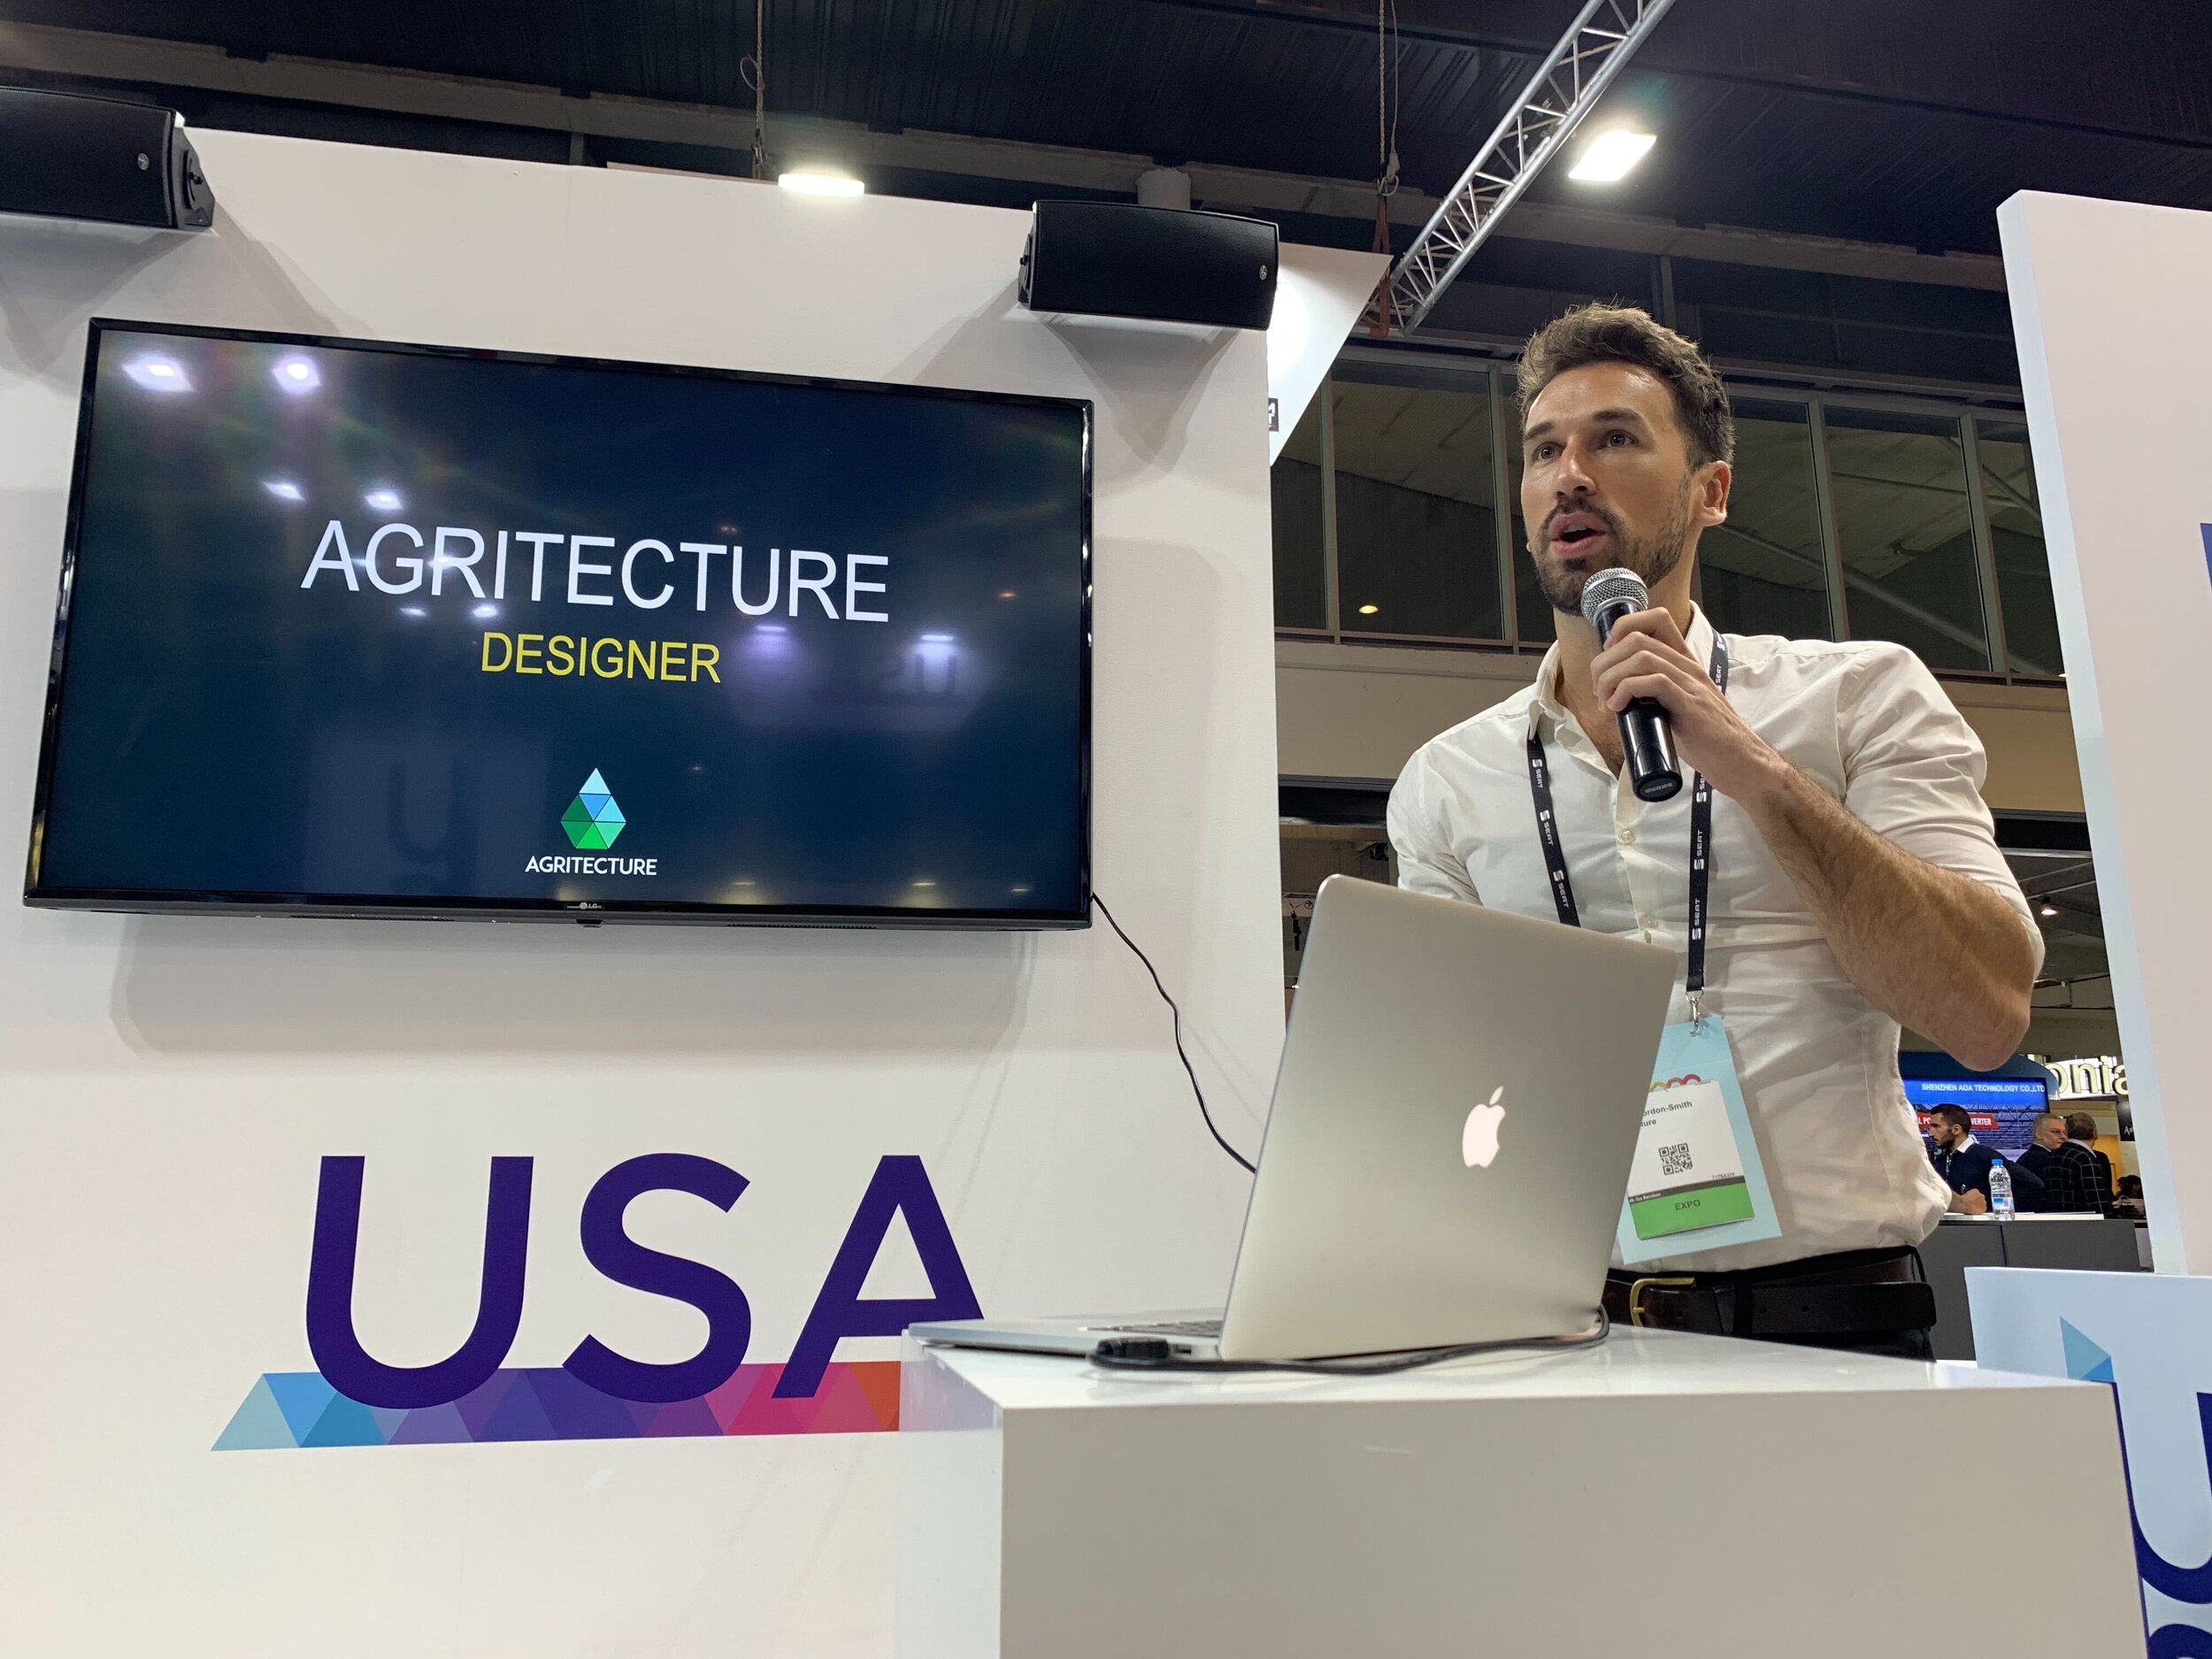 Agritecture CEO, Henry Gordon-Smith, demonstrating Agritecture Designer at Smart Cities Expo World Congress